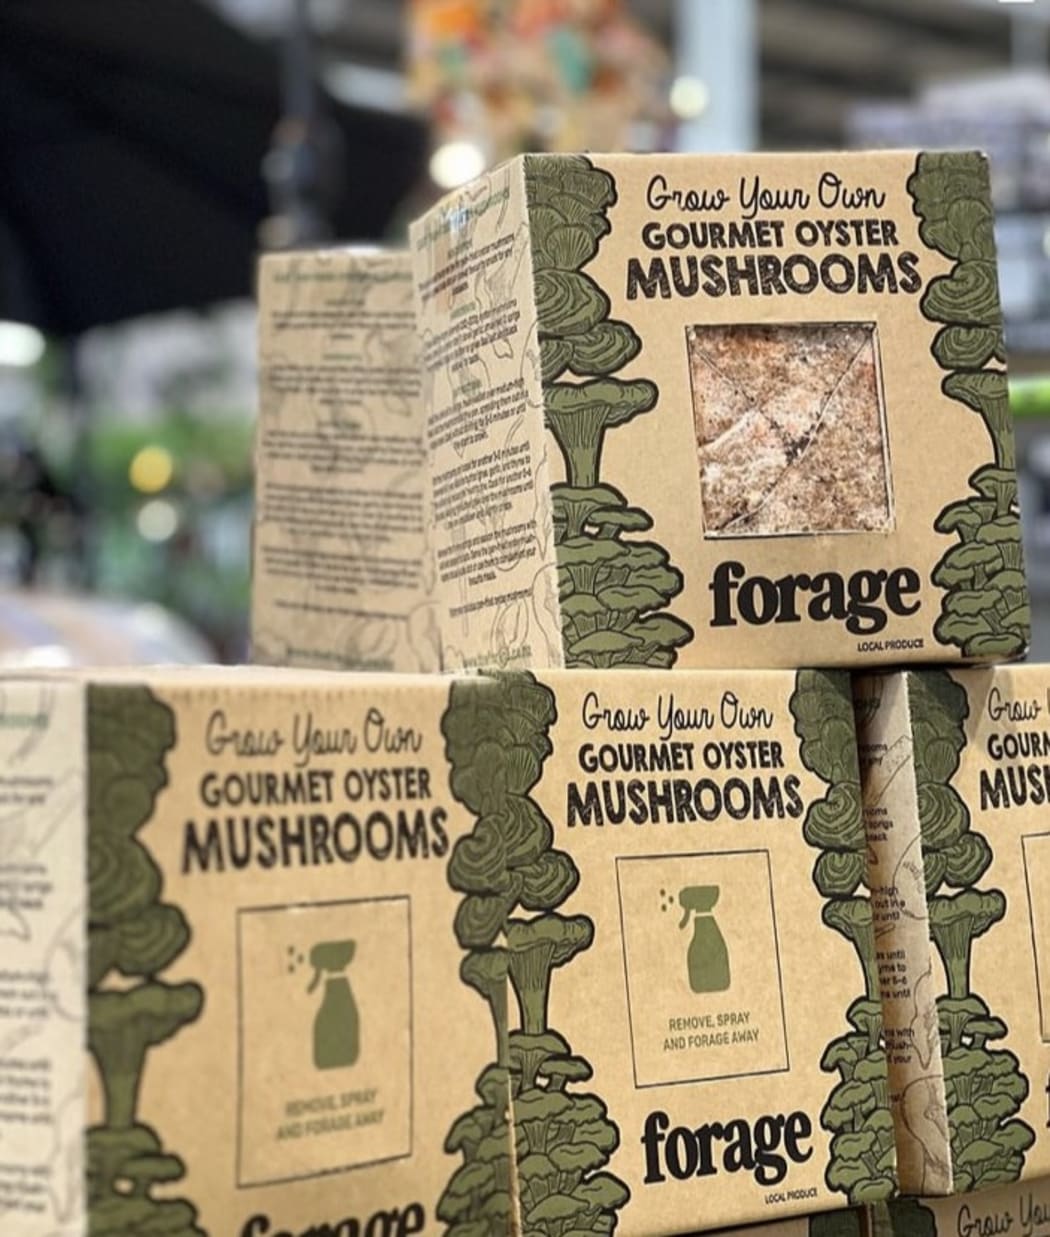 Forage grow your own gourmet oyster mushroom kits